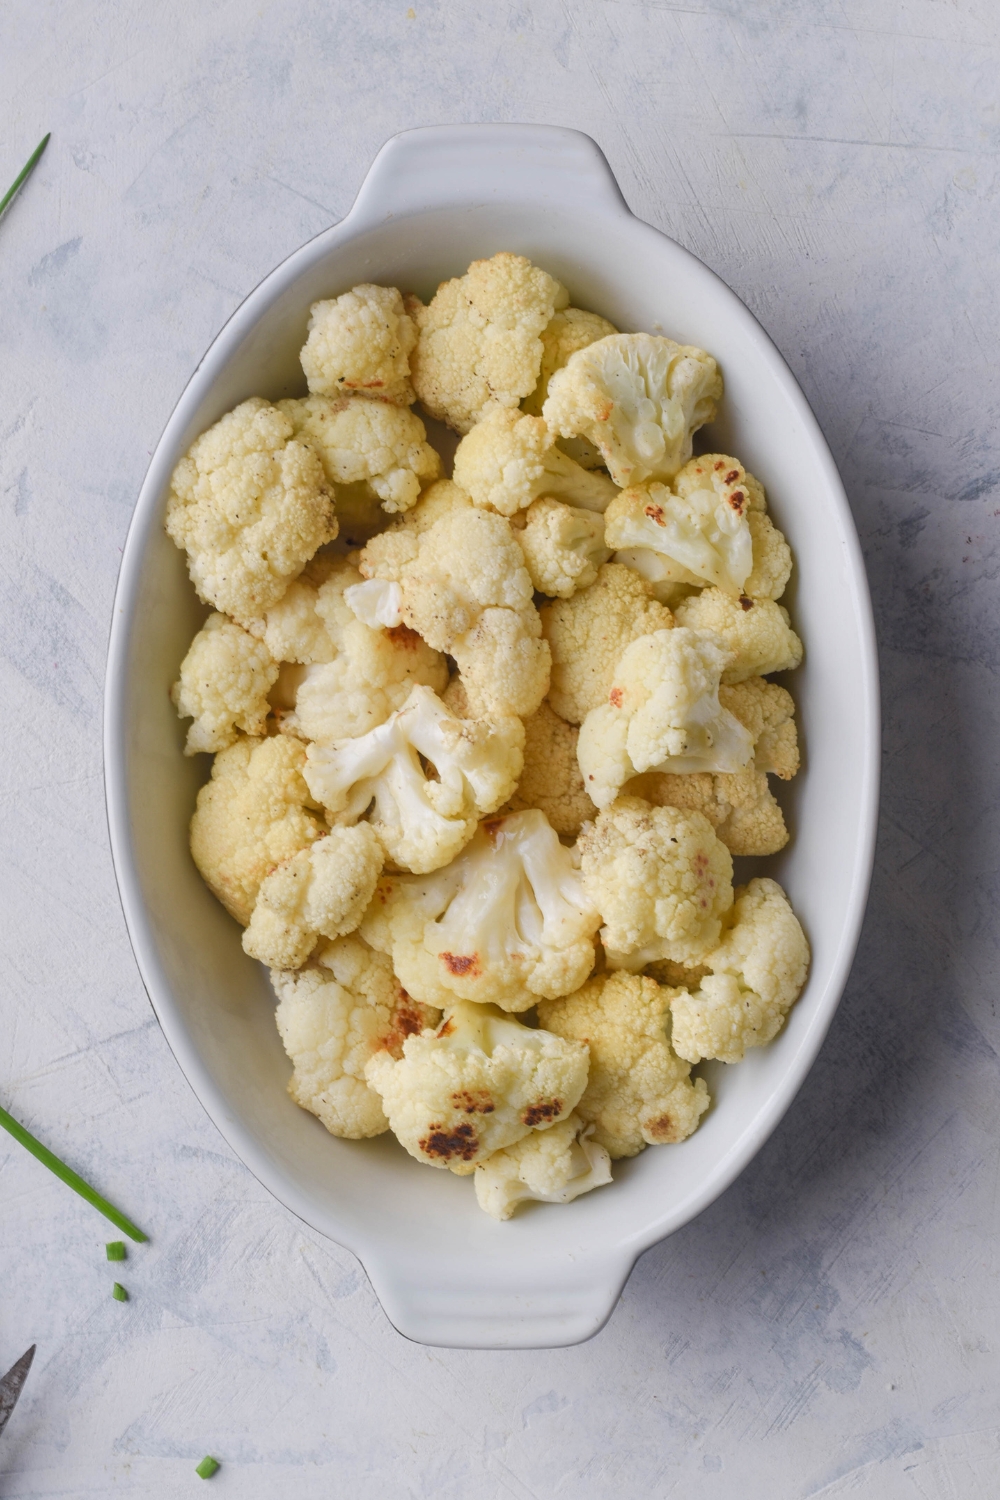 An overhead view of a baking dish with roasted cauliflower florets in it.